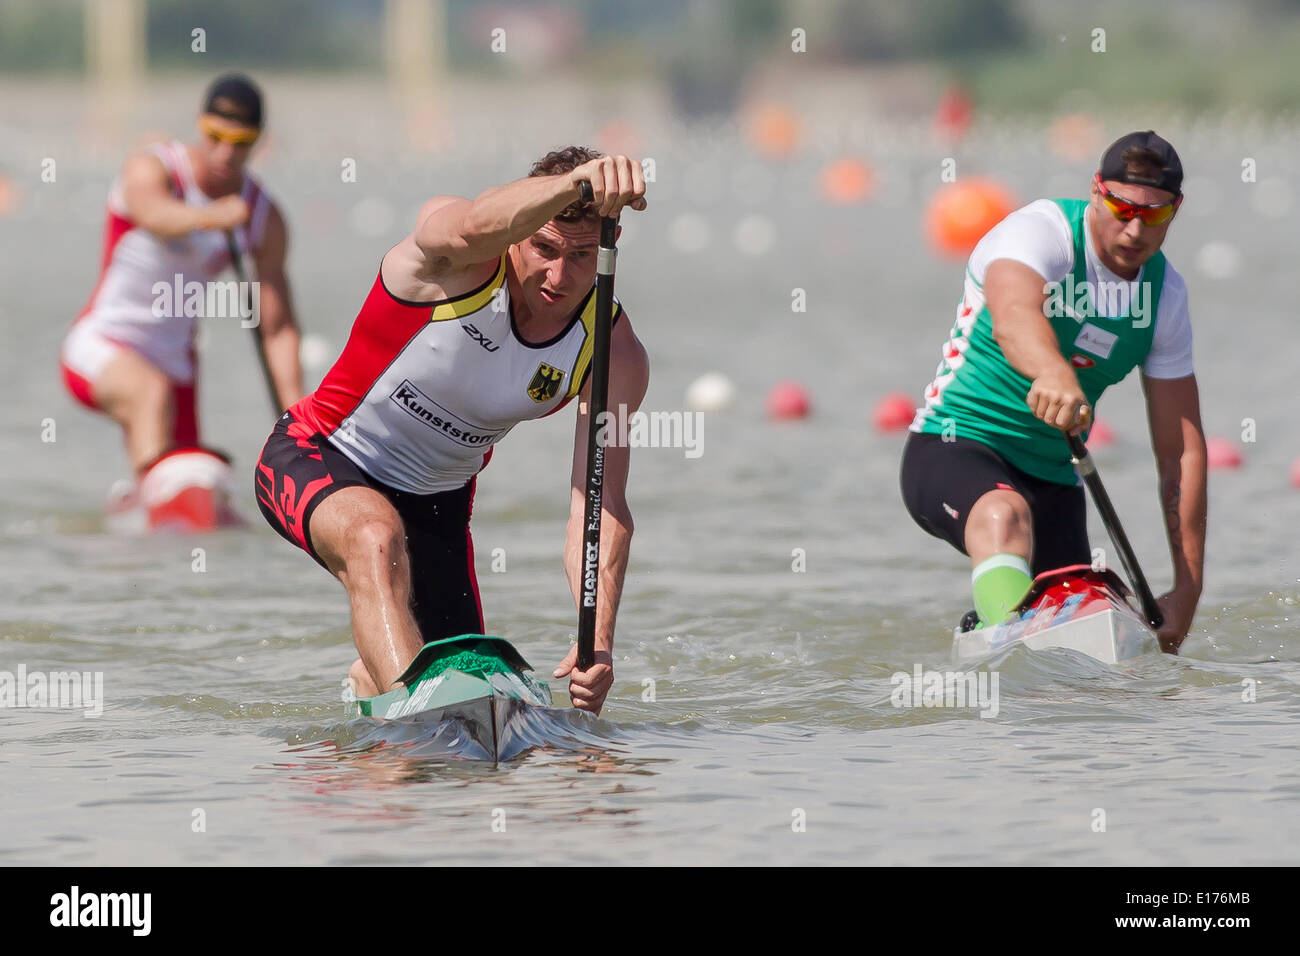 Szeged, Hungary. 25th May, 2014. Gold medalist Sebastian Brendel (front L) of Germany competes in C1 men's 5000m final at the 2014 ICF Canoe Sprint and Paracanoe World Cup in Szeged, Hungary, on May 25, 2014. He won gold with a time of 23 minutes 14.260 seconds. Credit:  Attila Volgyi/Xinhua/Alamy Live News Stock Photo